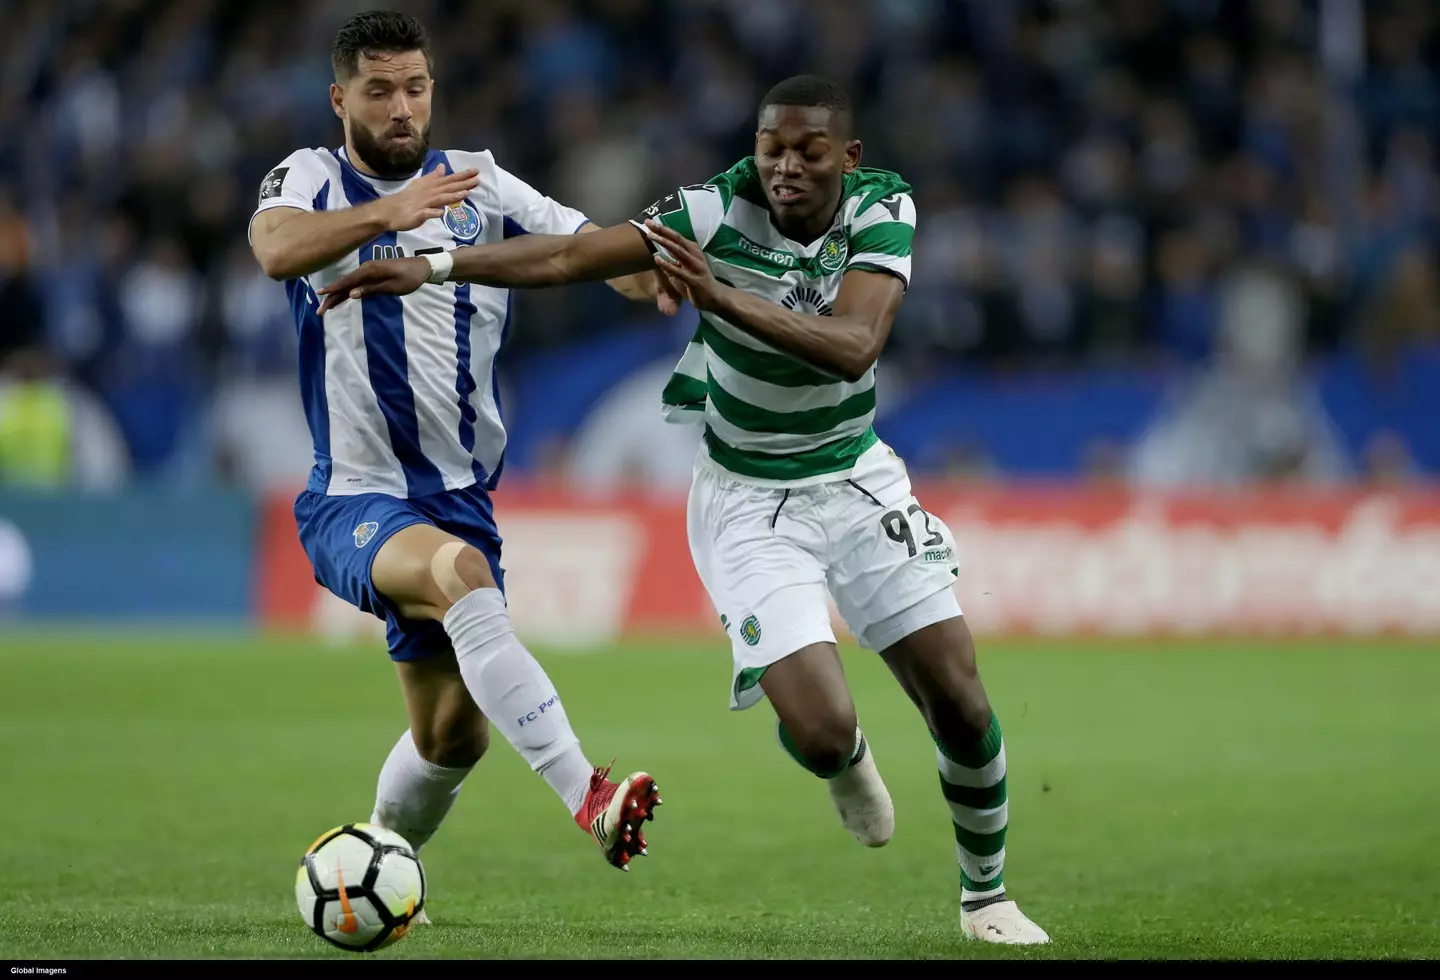 Leao left Sporting Lisbon in 2018 before joining Lille on a free transfer (Image: Alamy)